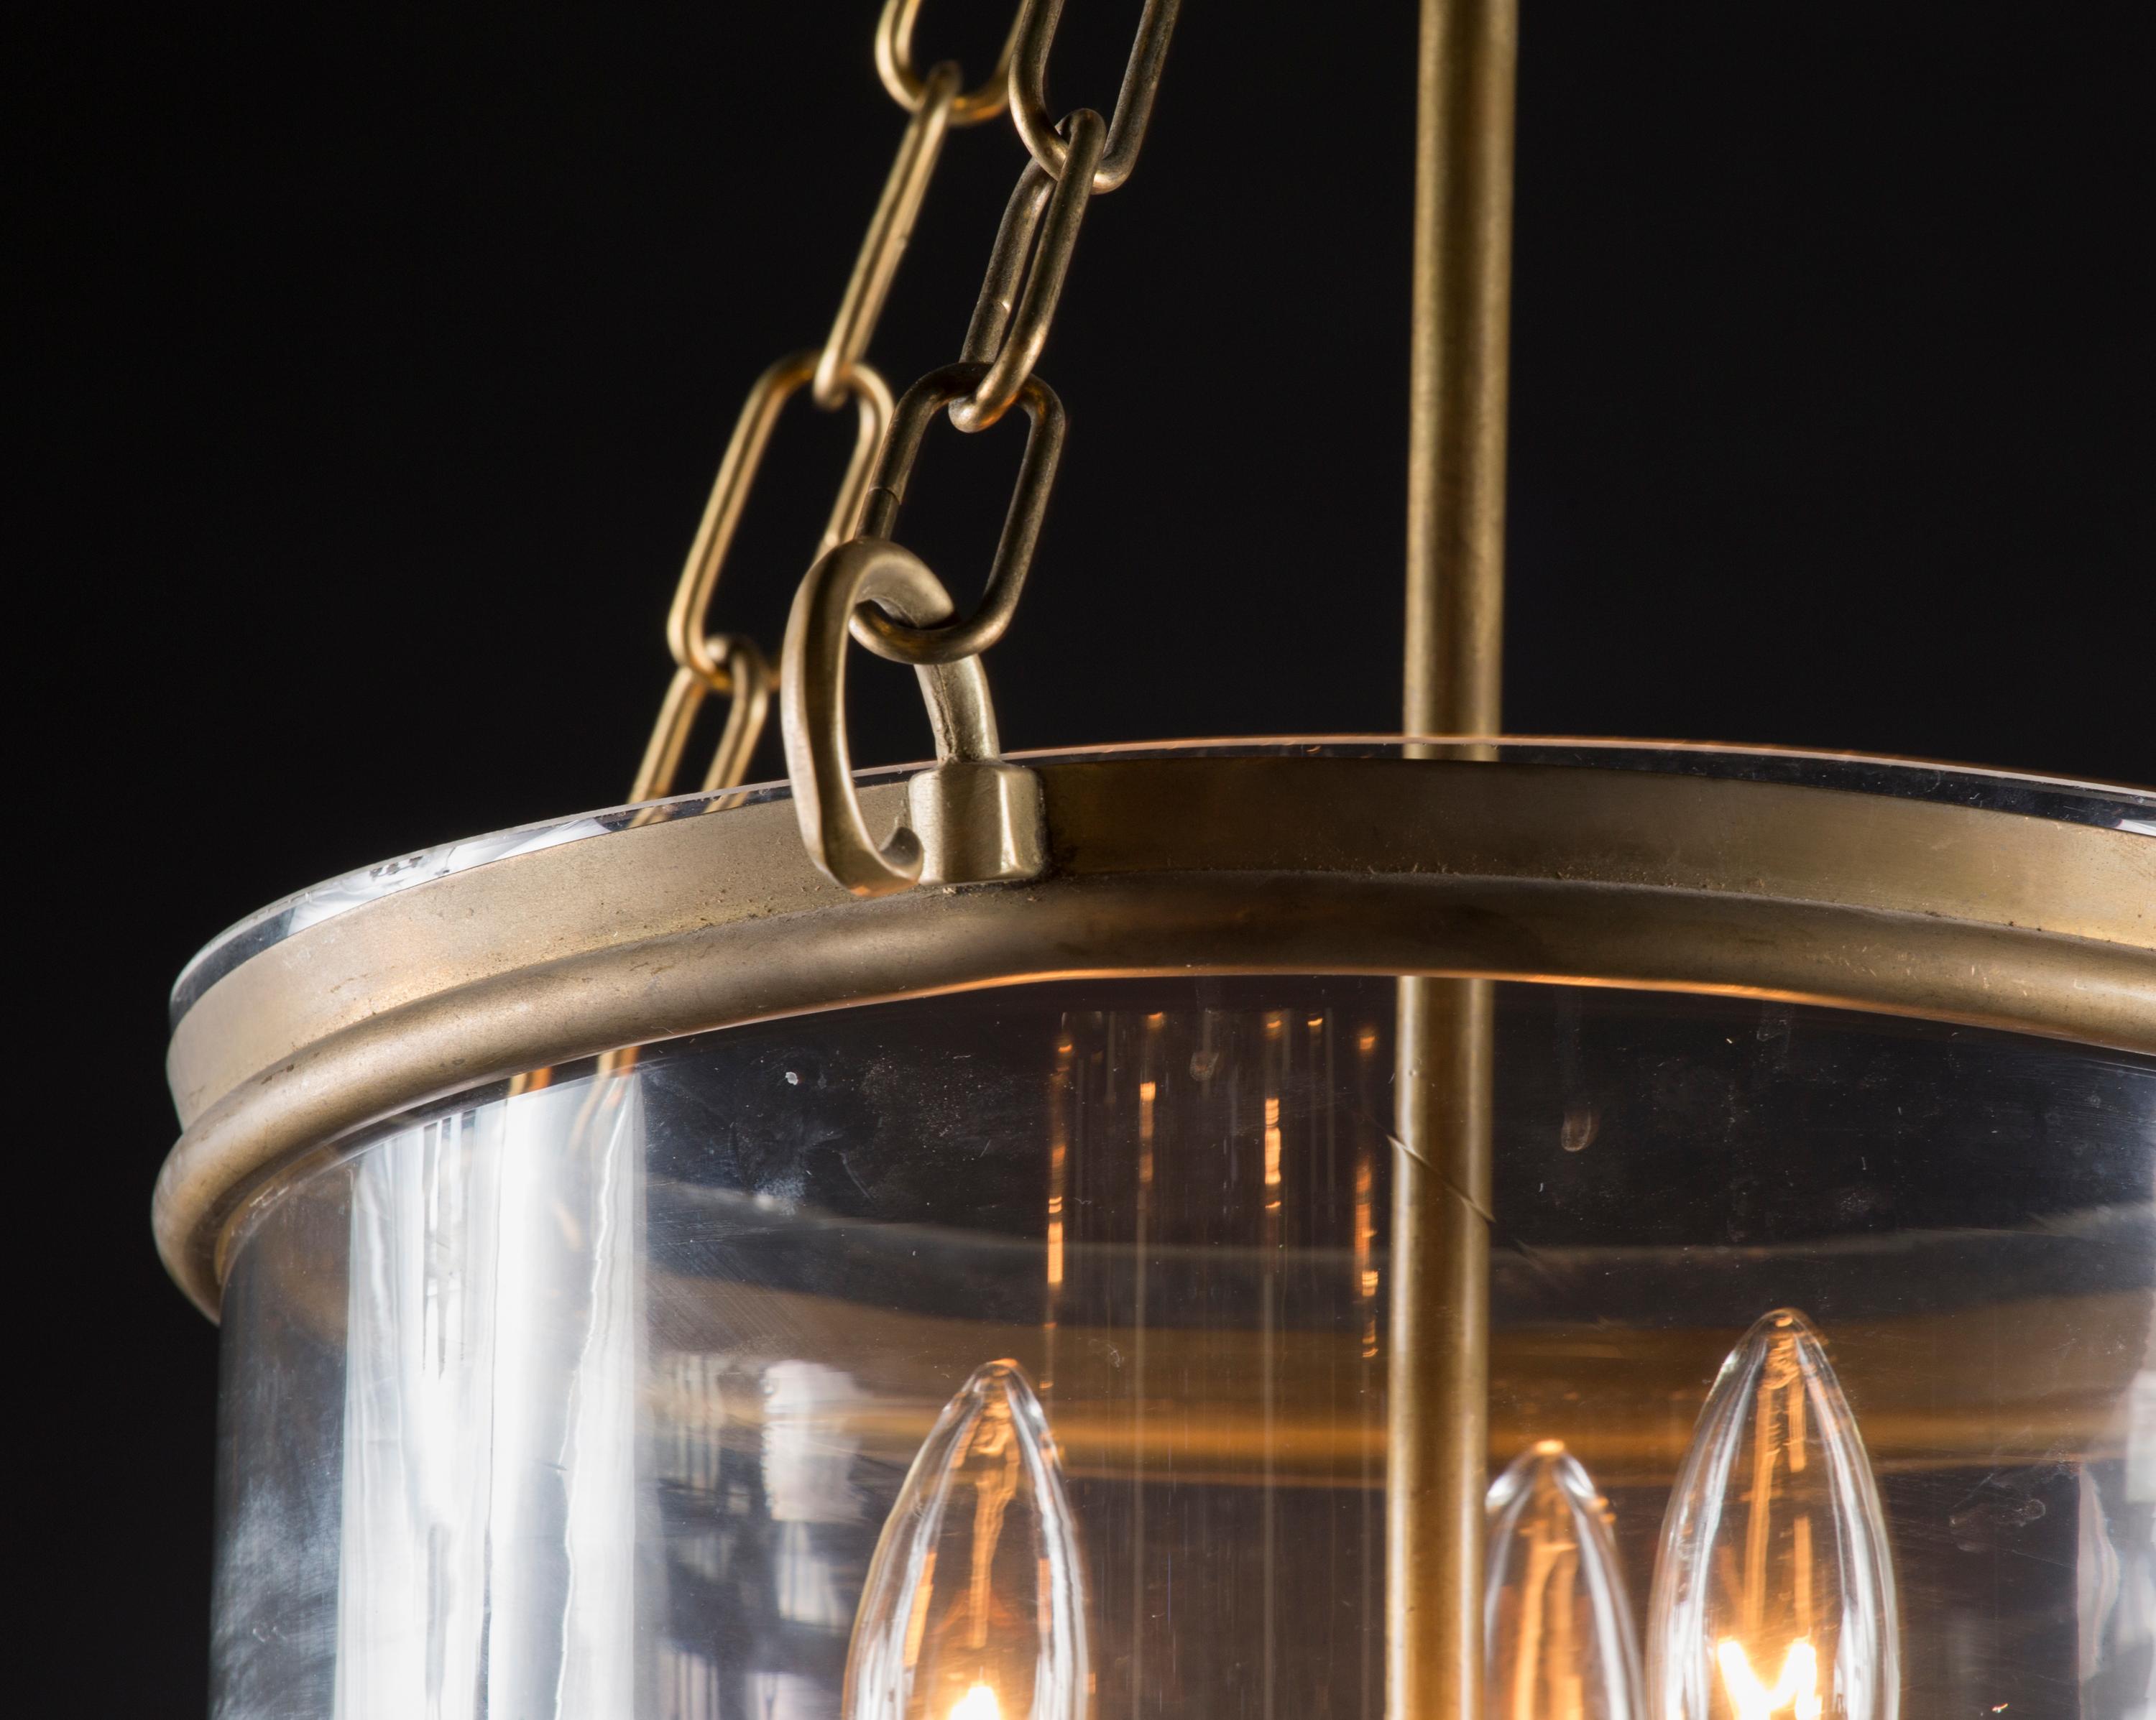 This beautiful, simple Italian hanging lantern dates back to the mid 20th Century and features both solid brass and a gorgeous bell shaped glass bowl. The three lights rest in the center of the glass, hung by the brass stem. The piece as a whole is